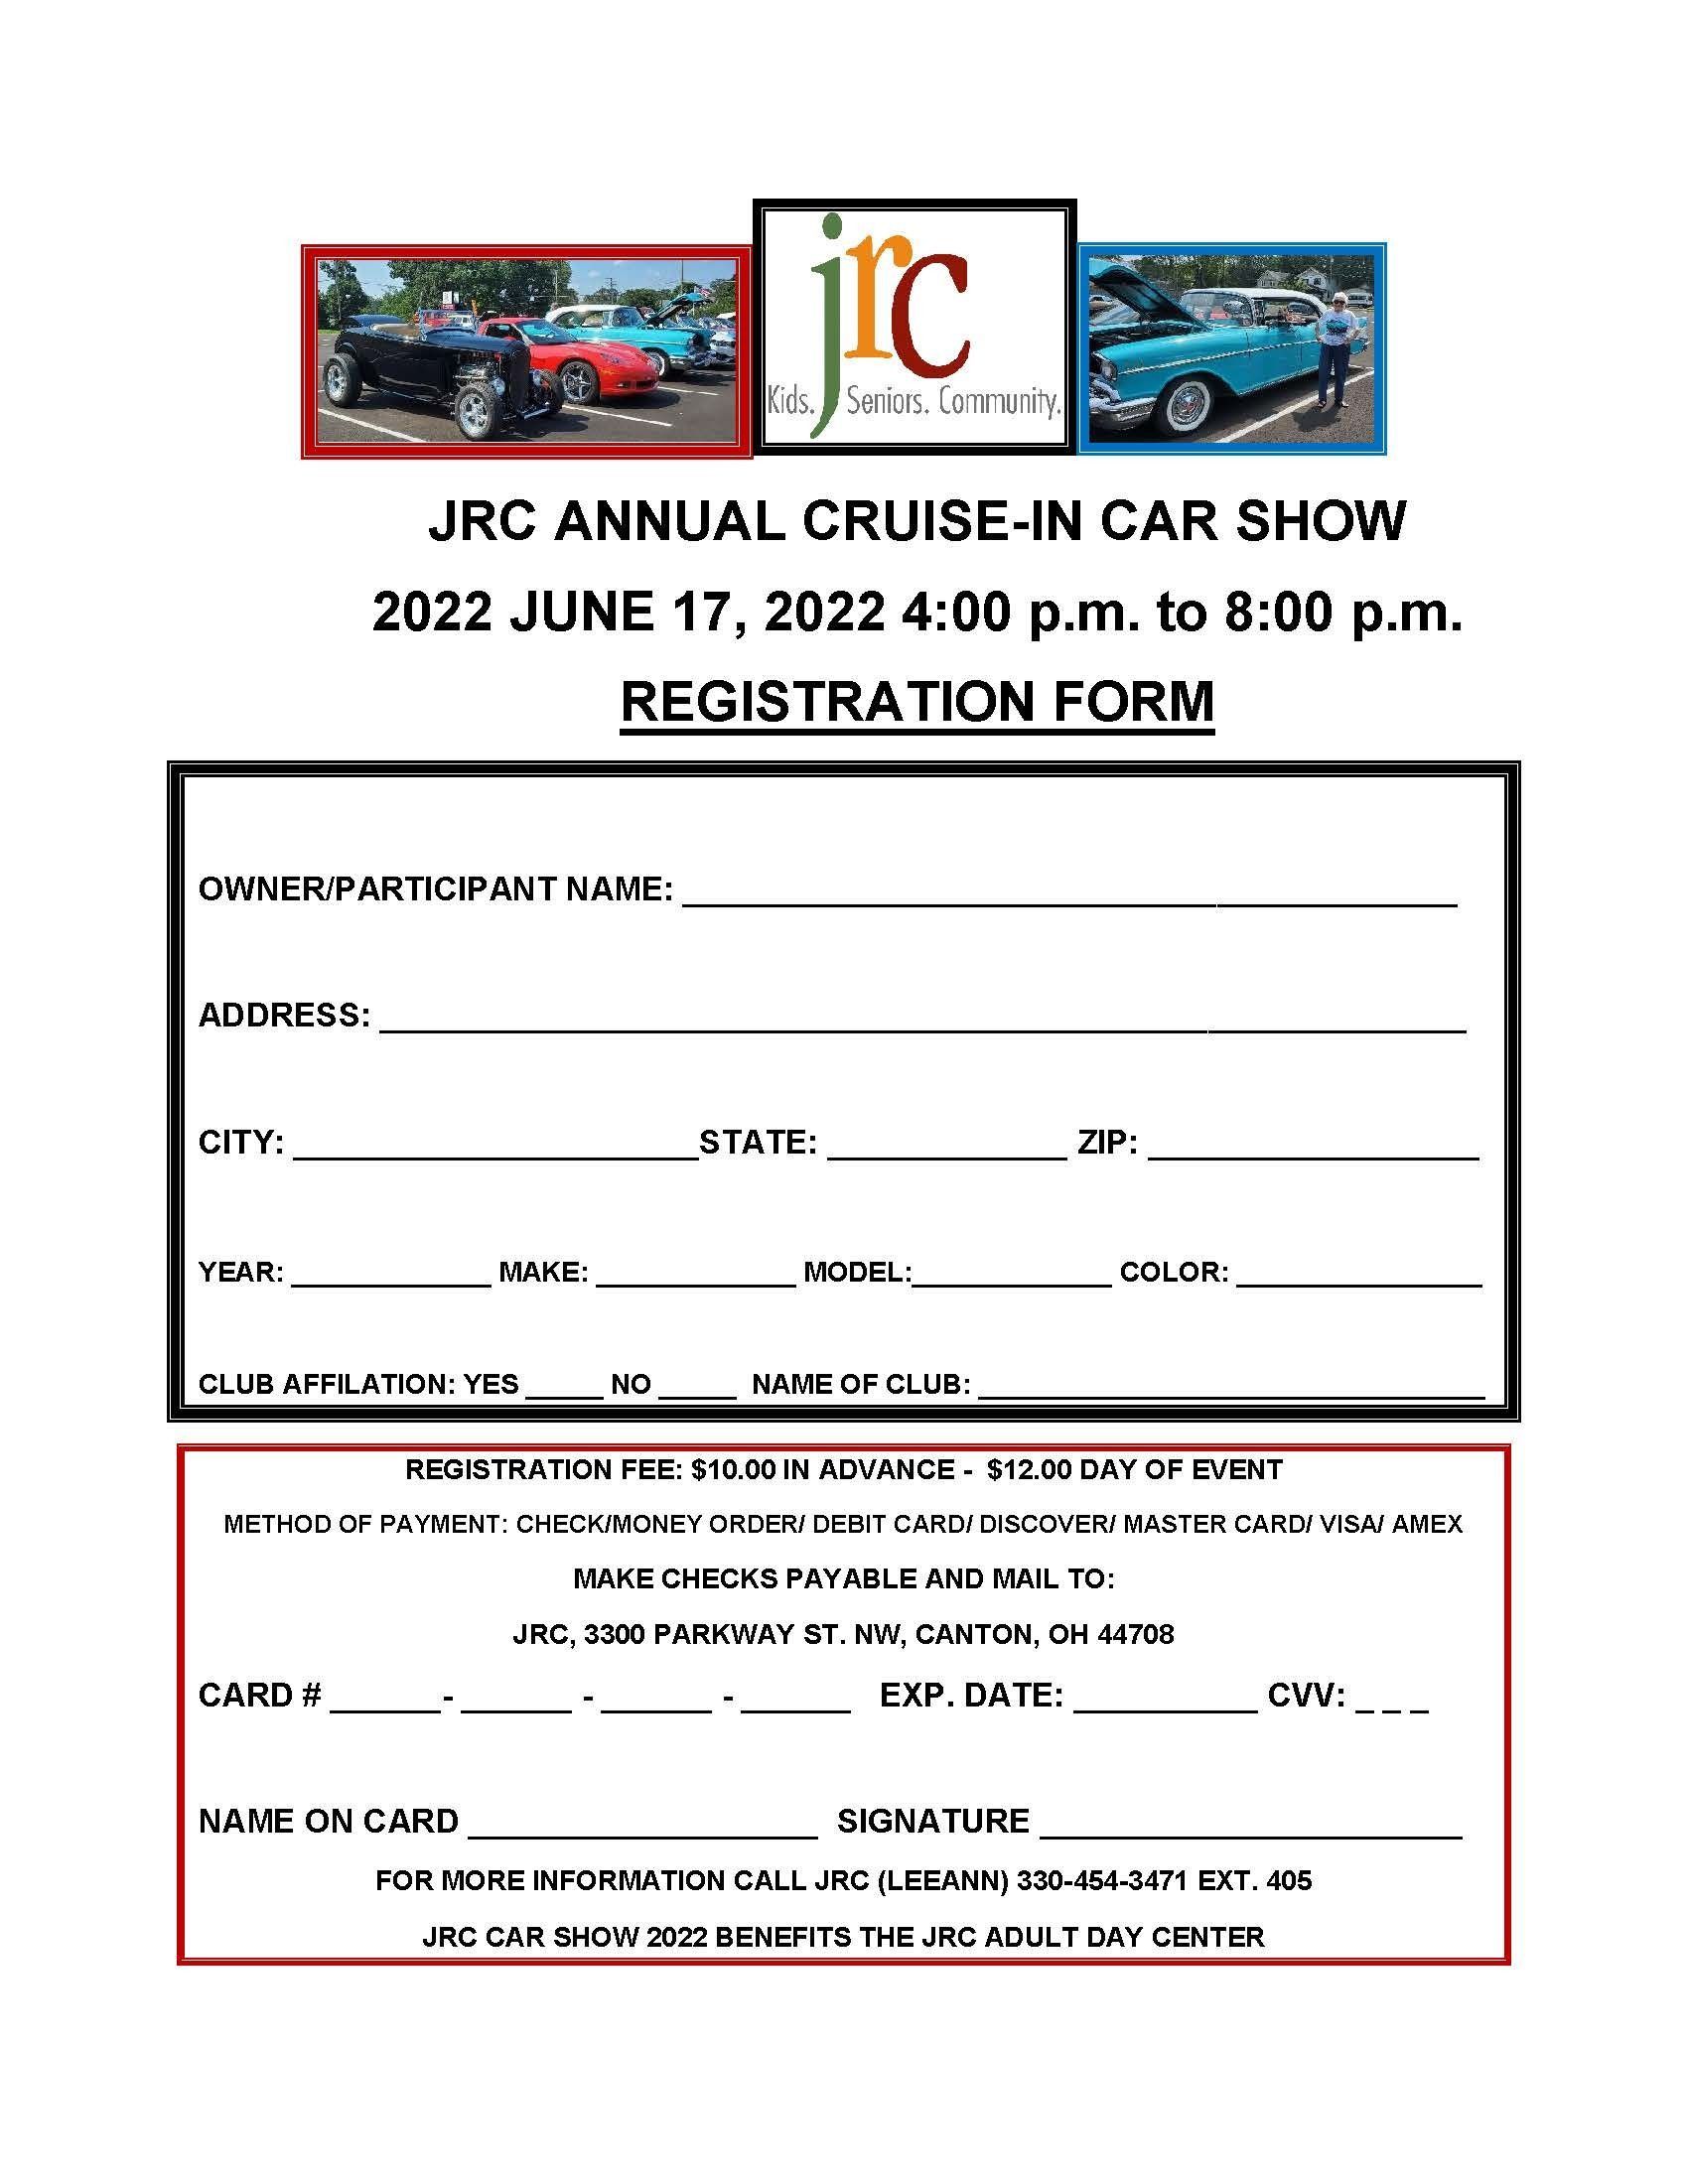 JRC Annual Cruise-In Car Show - DOWNLOAD PRINT Registration Form ABOVE